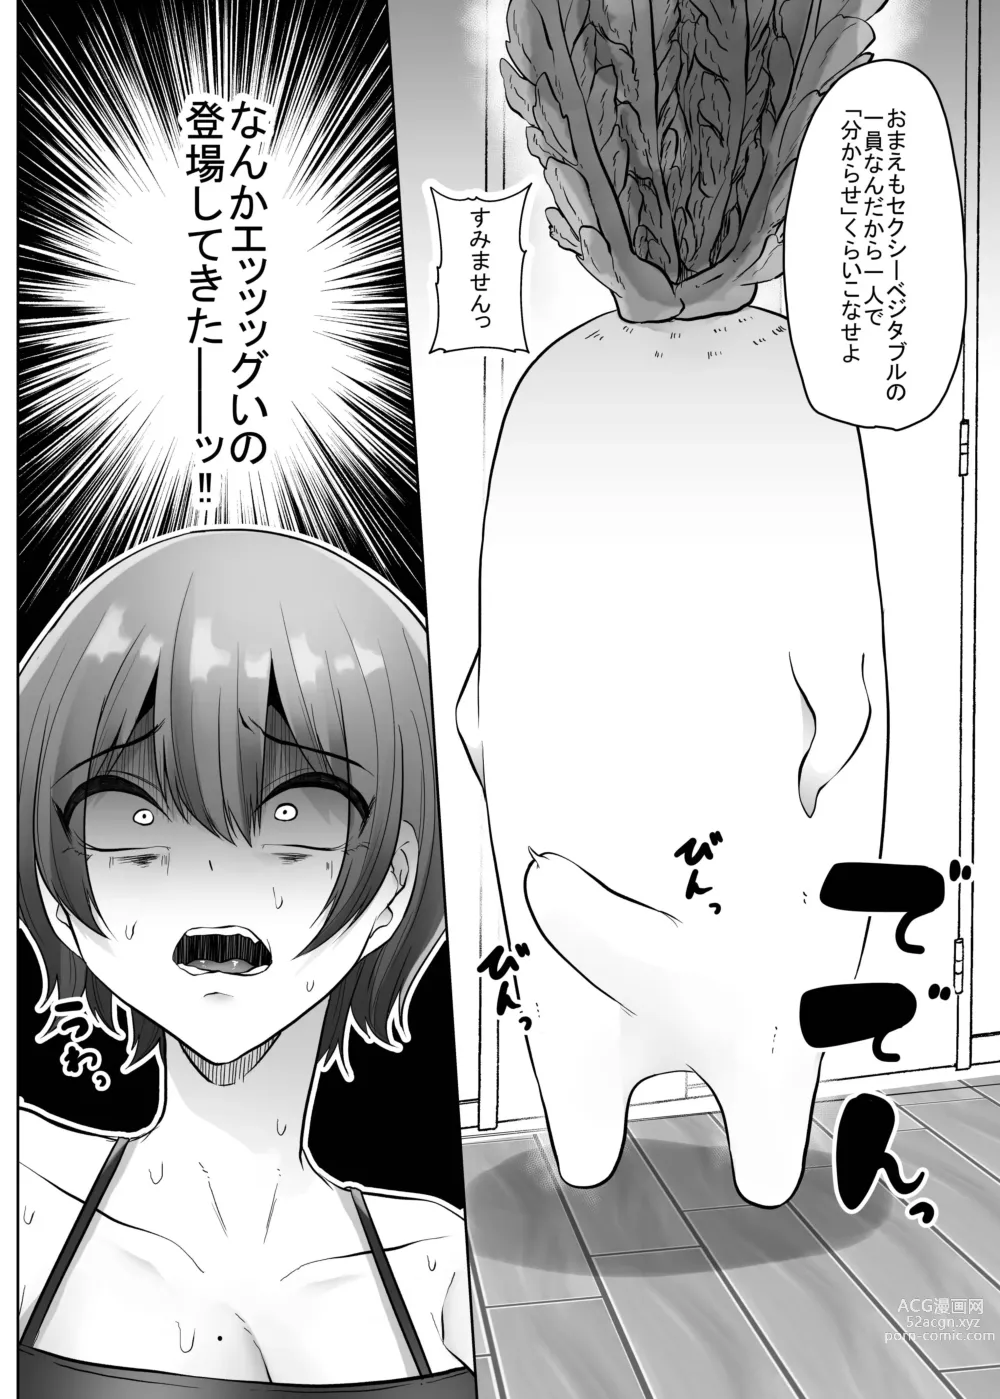 Page 12 of doujinshi Sexy~Vegetables